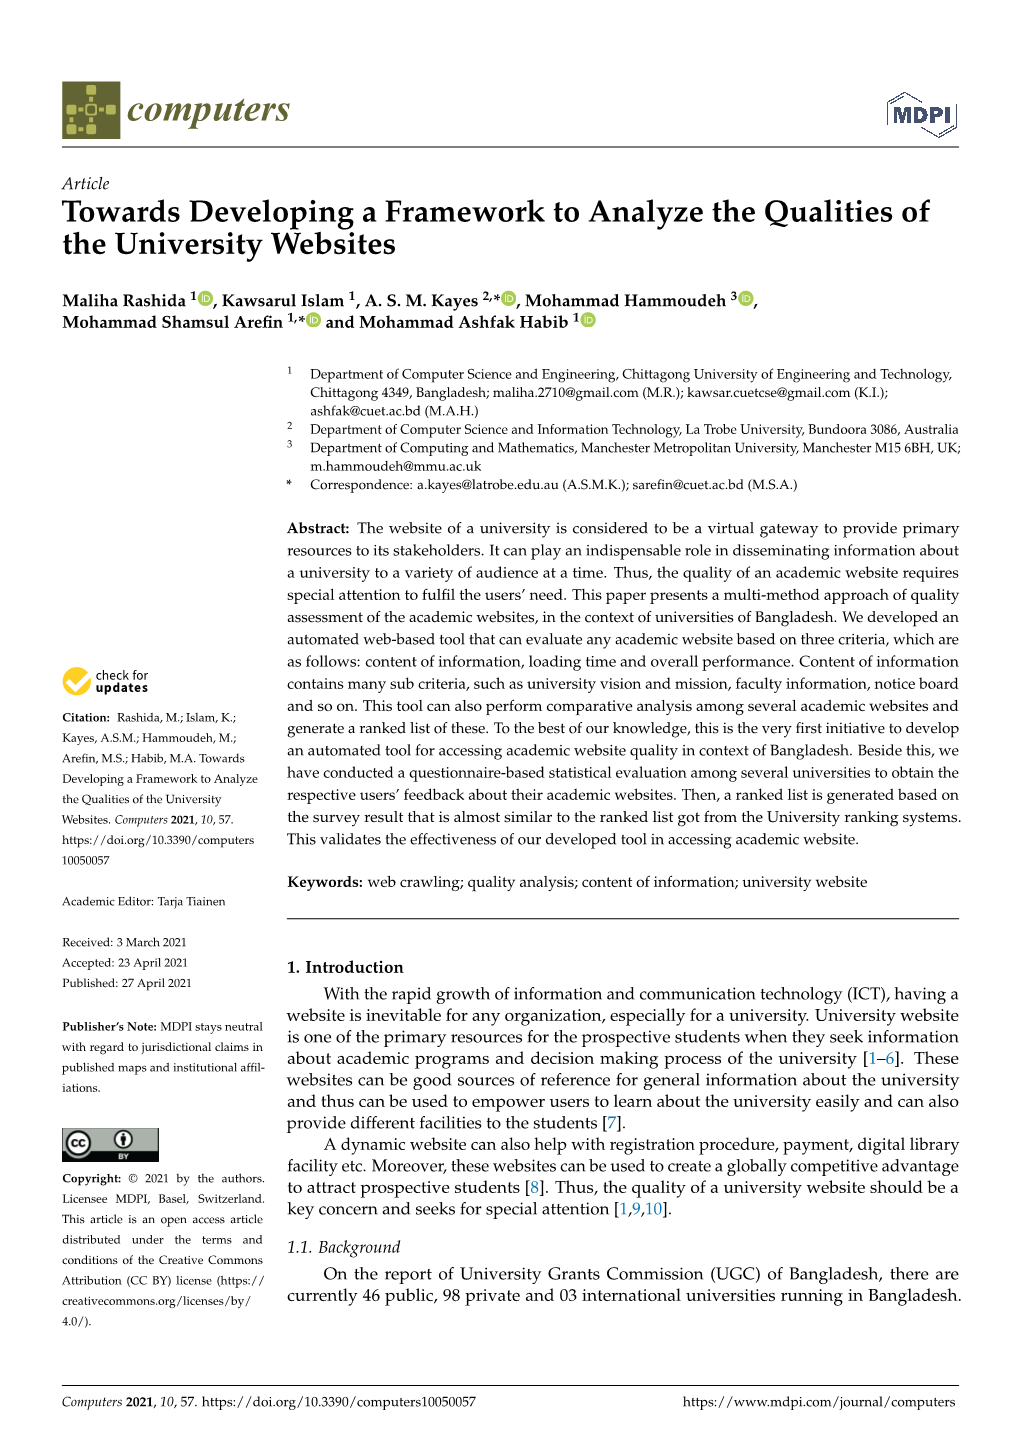 Towards Developing a Framework to Analyze the Qualities of the University Websites